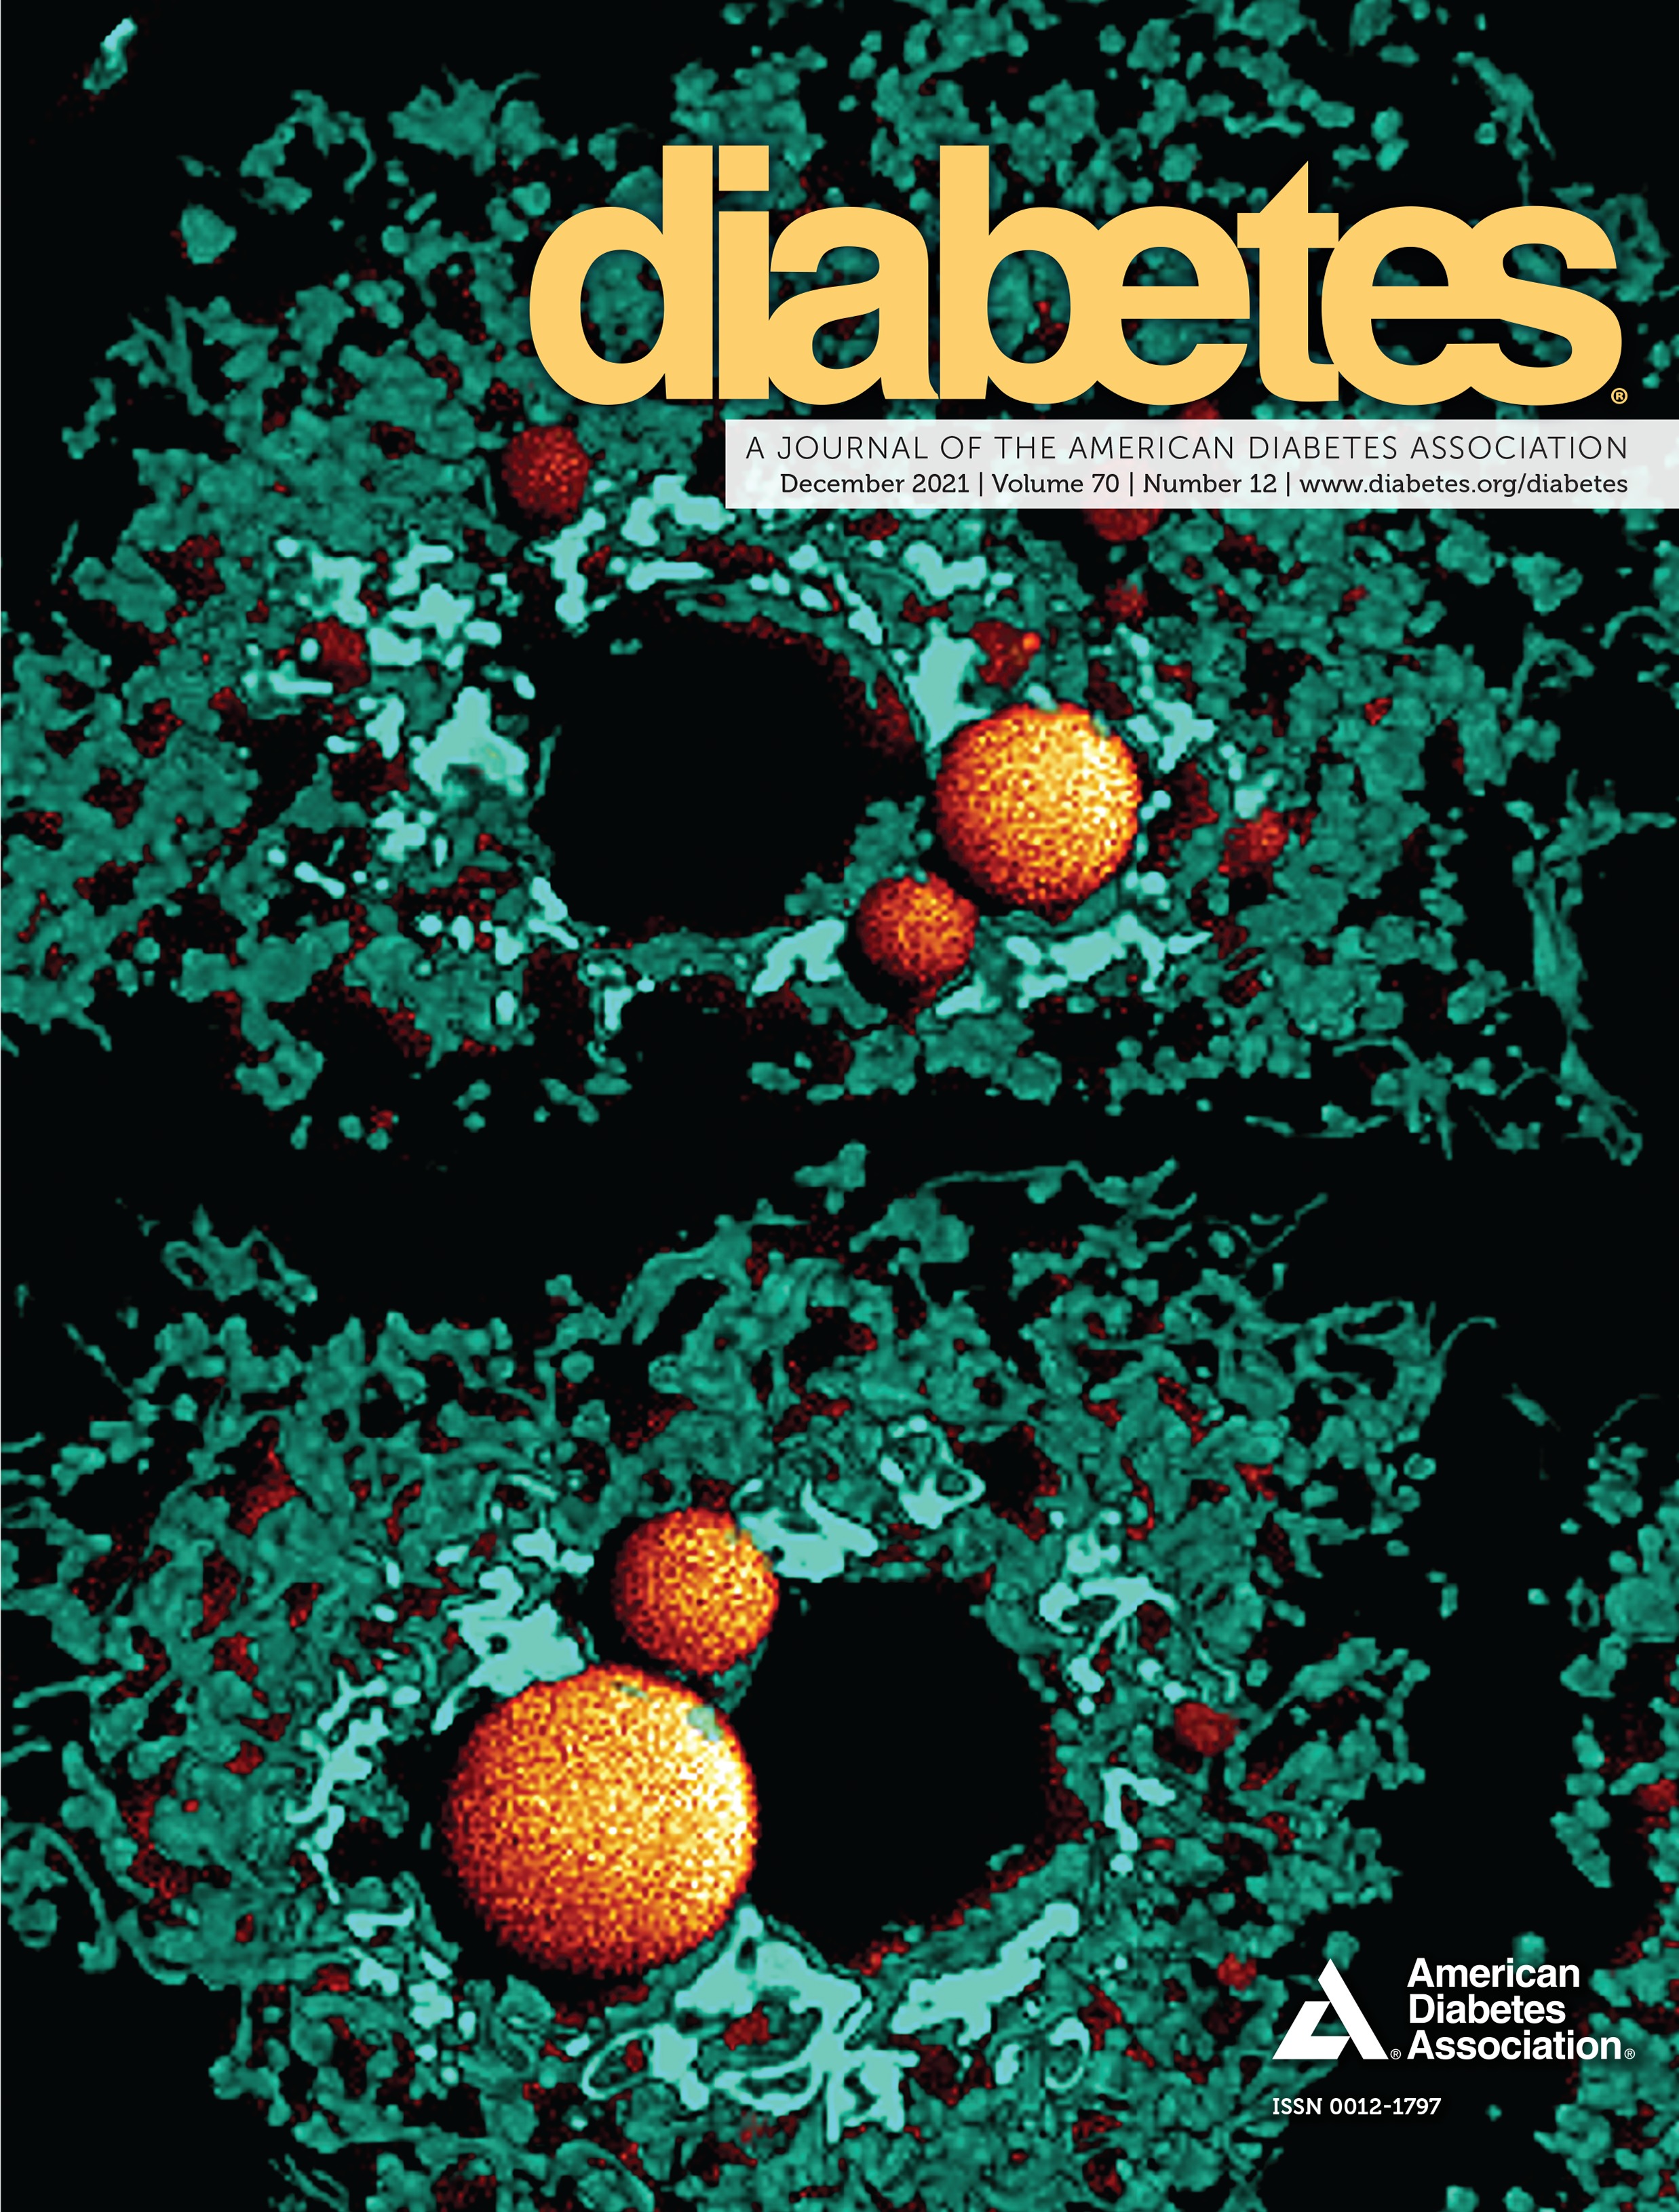 Syntaxin 4 Enrichment in {beta}-Cells Prevents Conversion to Autoimmune Diabetes in Non-Obese Diabetic (NOD) Mice